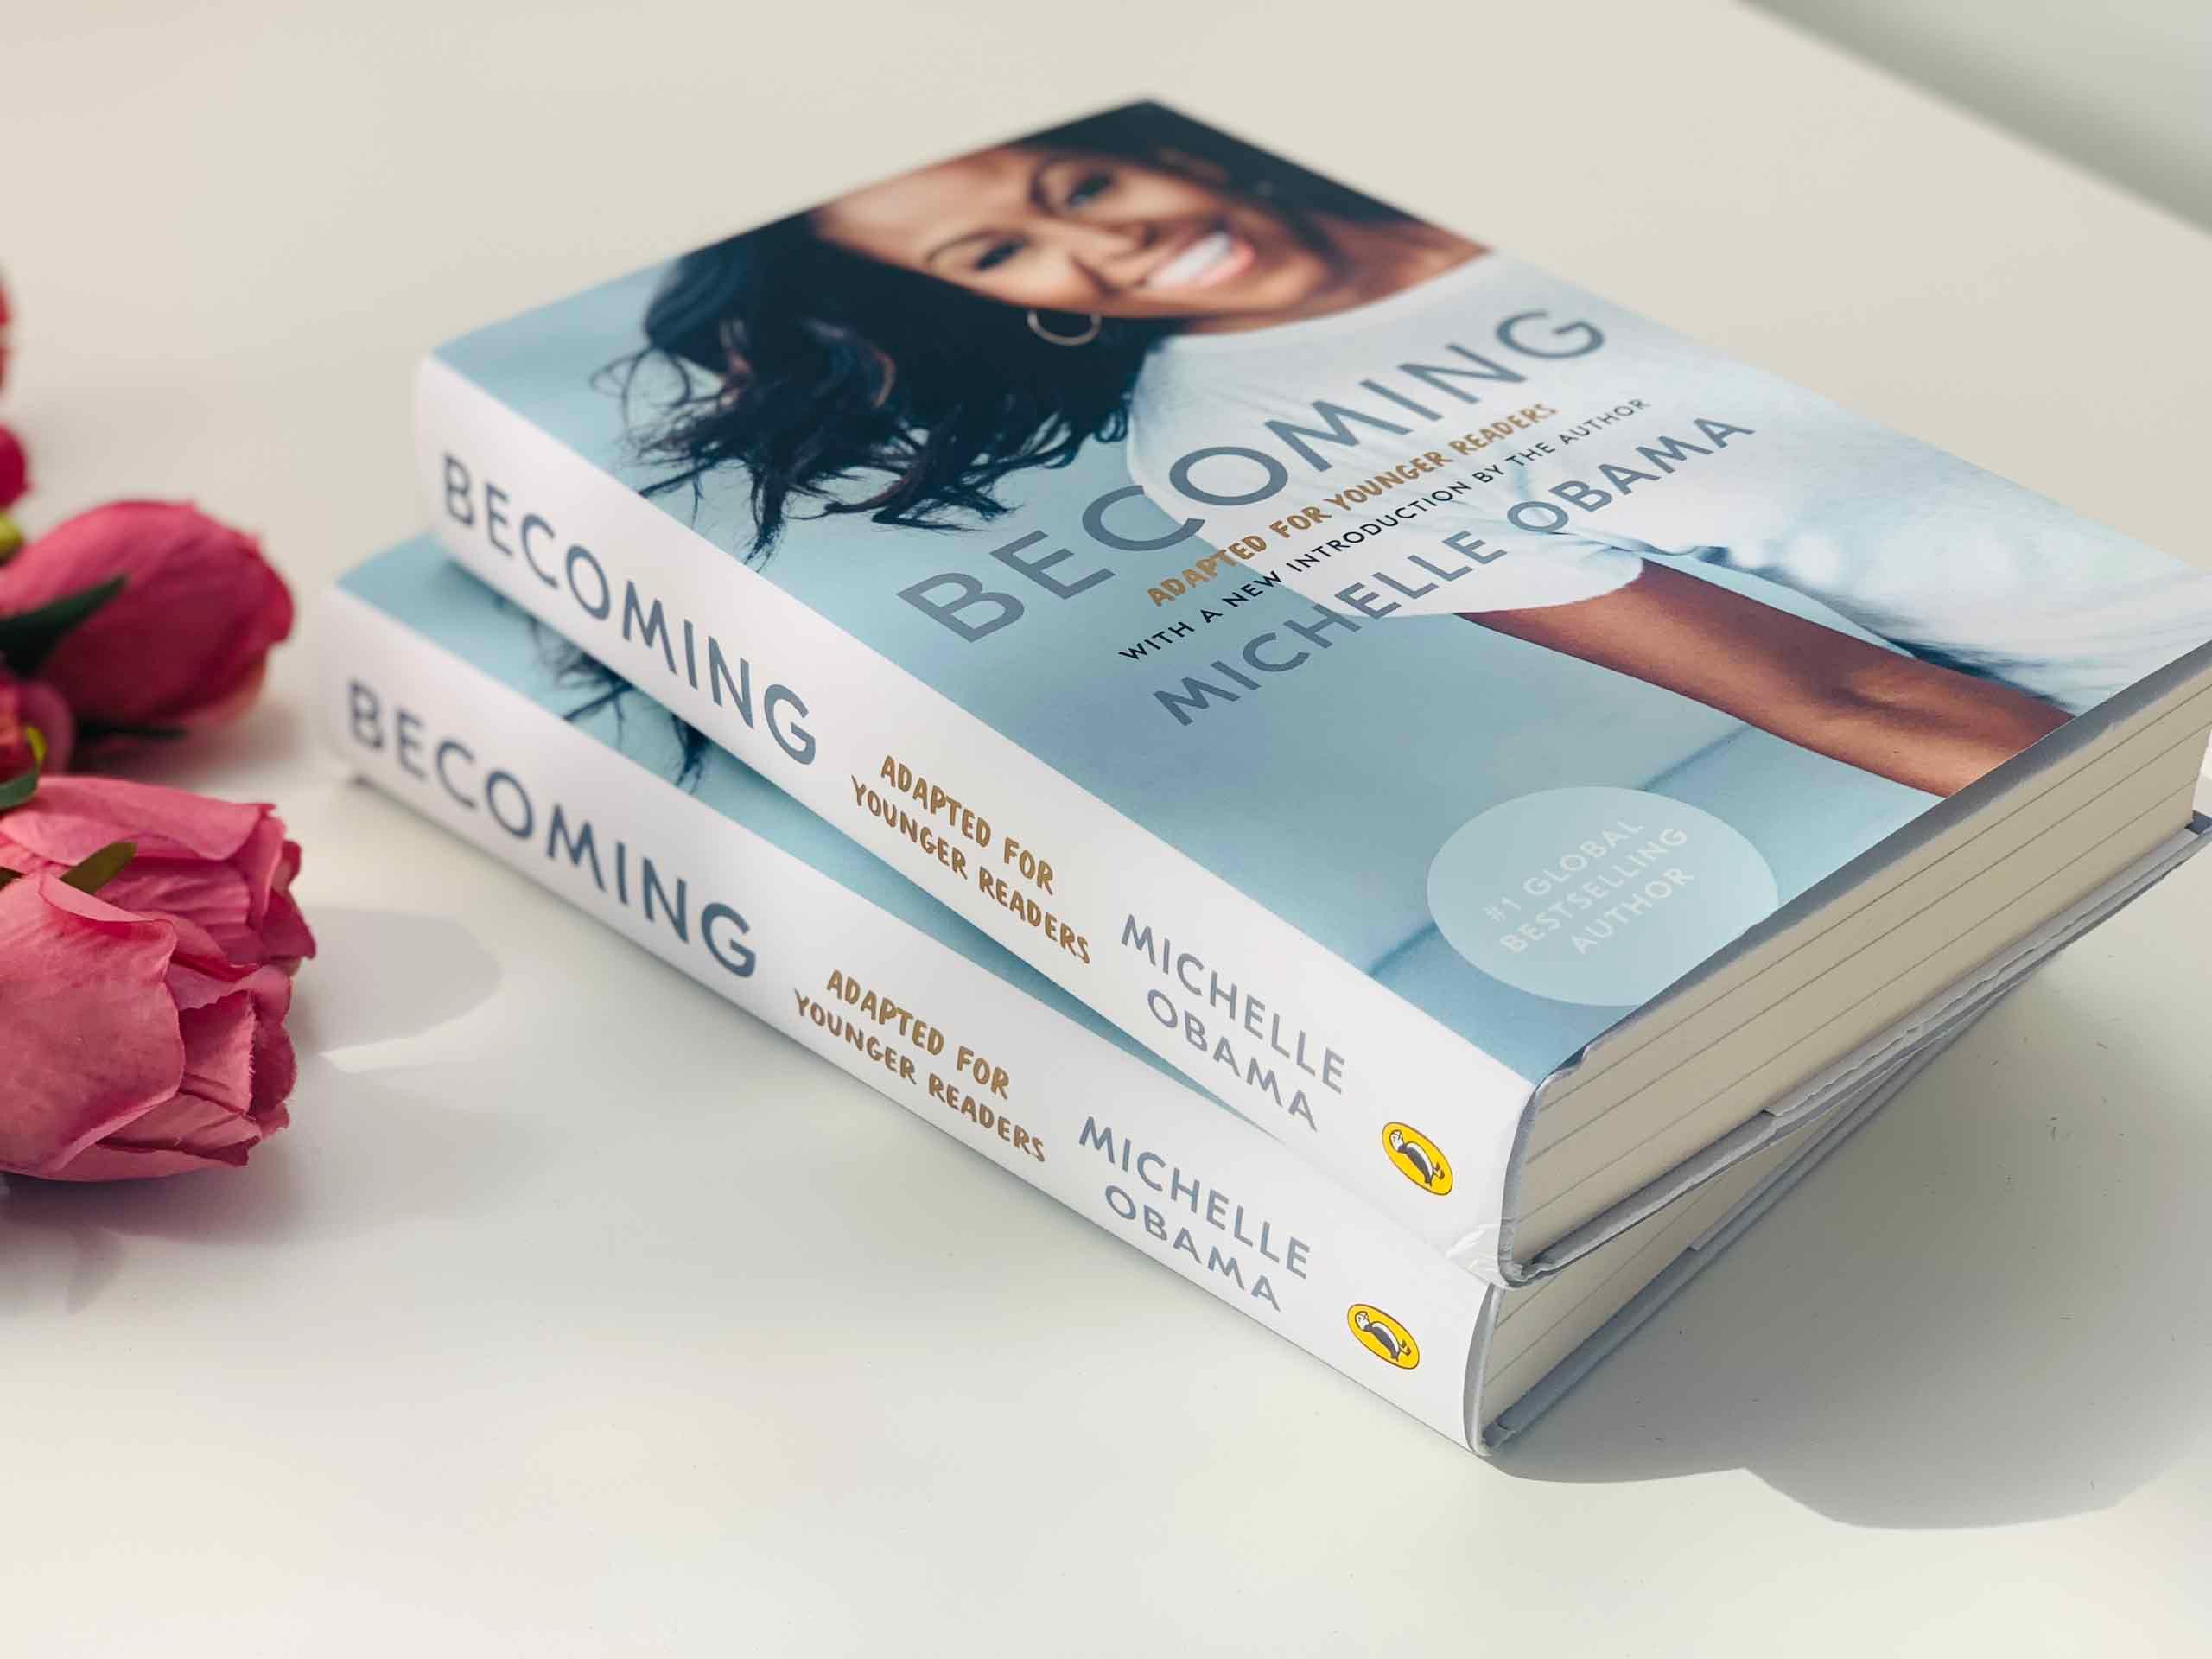 Becoming: Adapted for Younger Readers